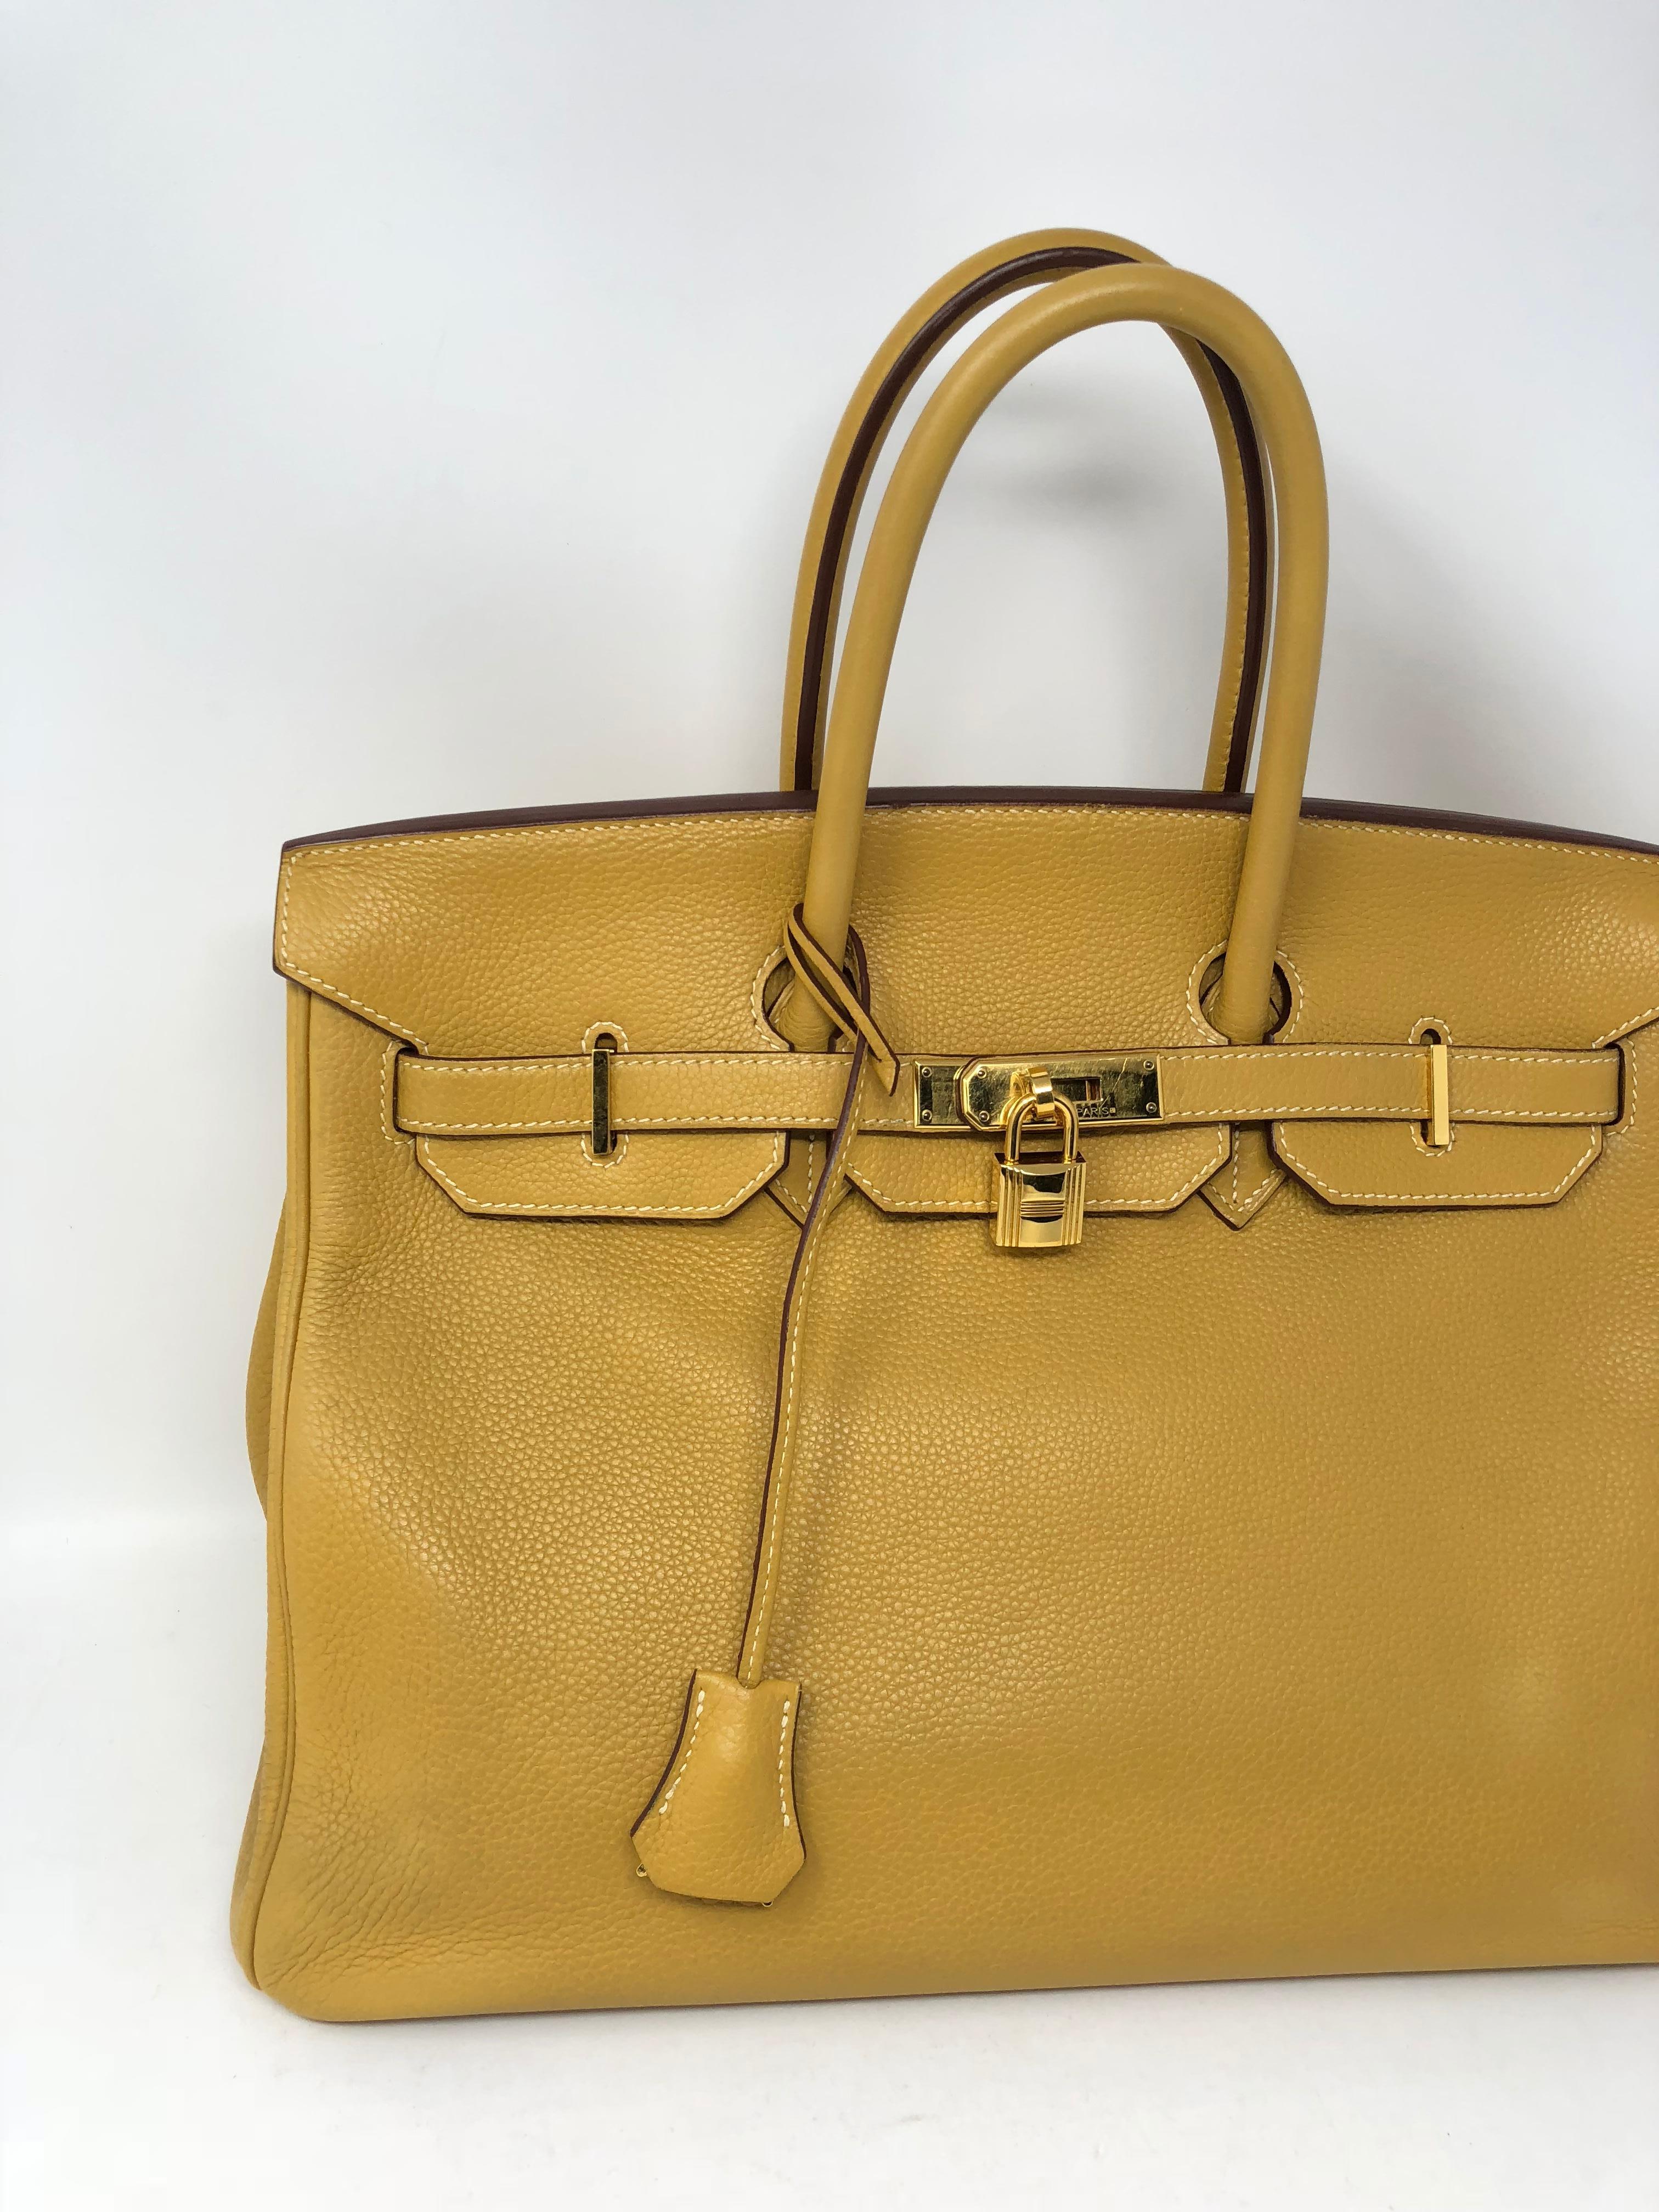 Hermes Birkin 35 in Curry Yellow with gold hardware. Neutral color in good condition. Minimal wear and nice togo leather. Stamped L square from 2008. 